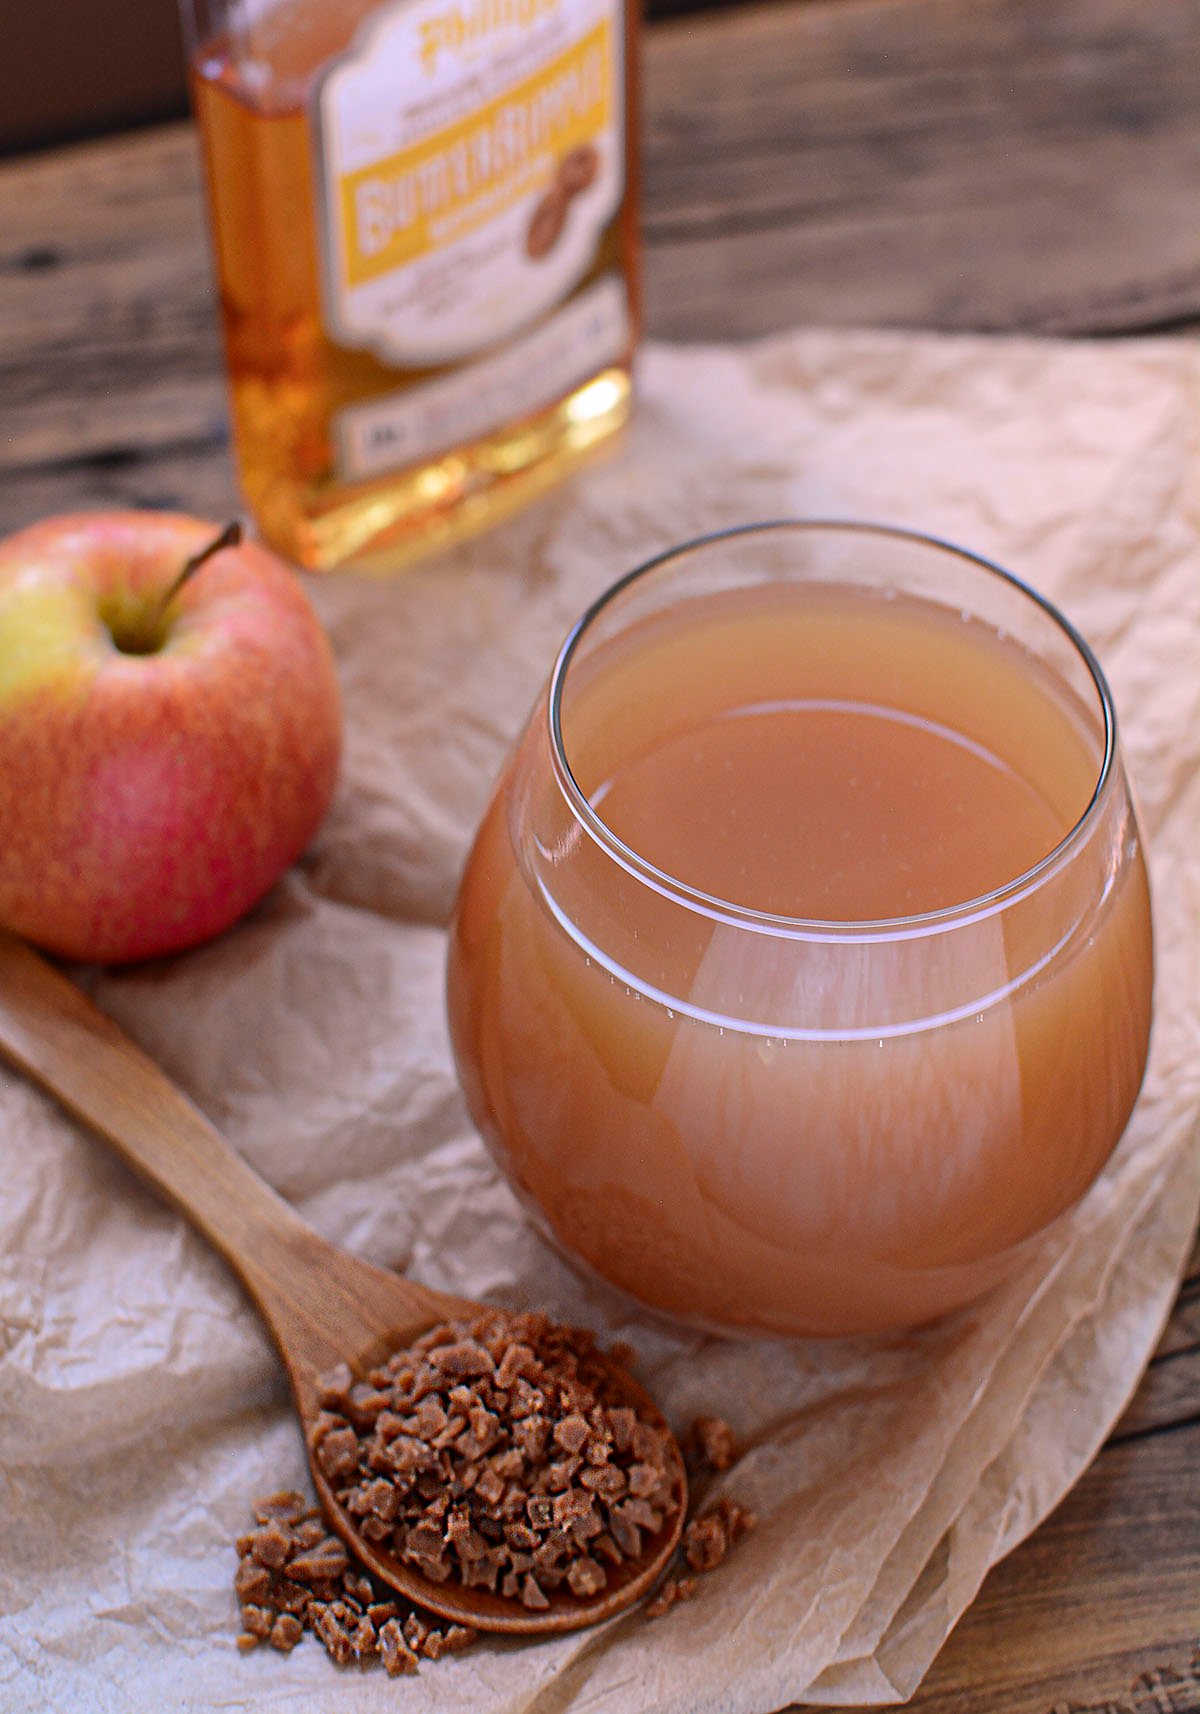 A glass of toffee apple cider sits on a table with an apple on the left, toffee bits down in the front and a small bottle of liquor in the background.